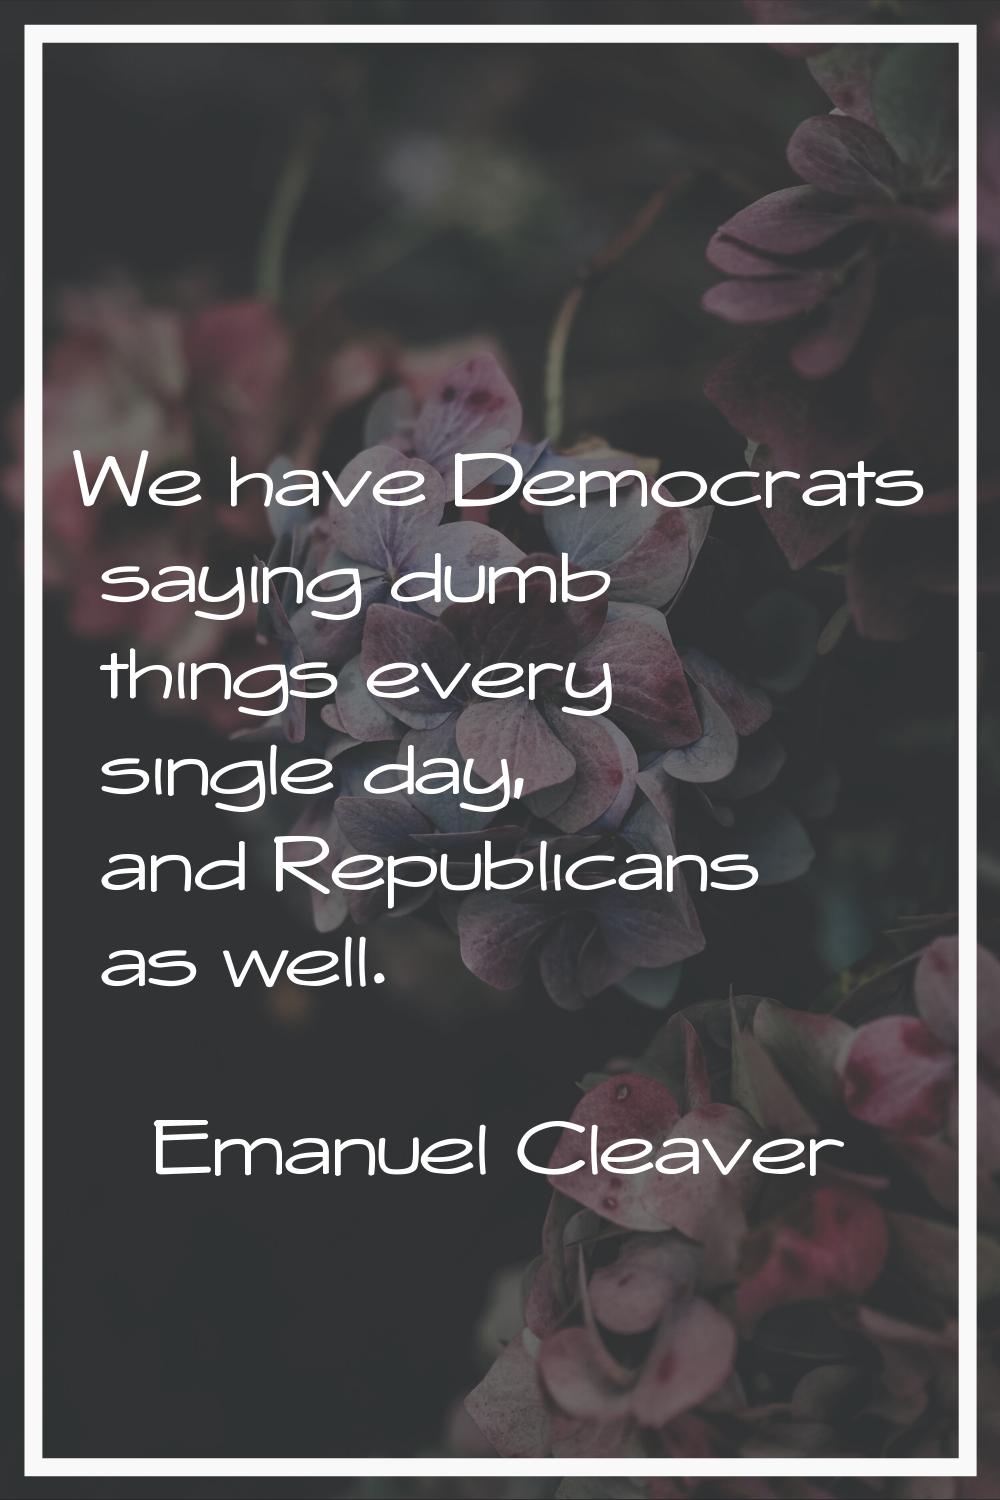 We have Democrats saying dumb things every single day, and Republicans as well.